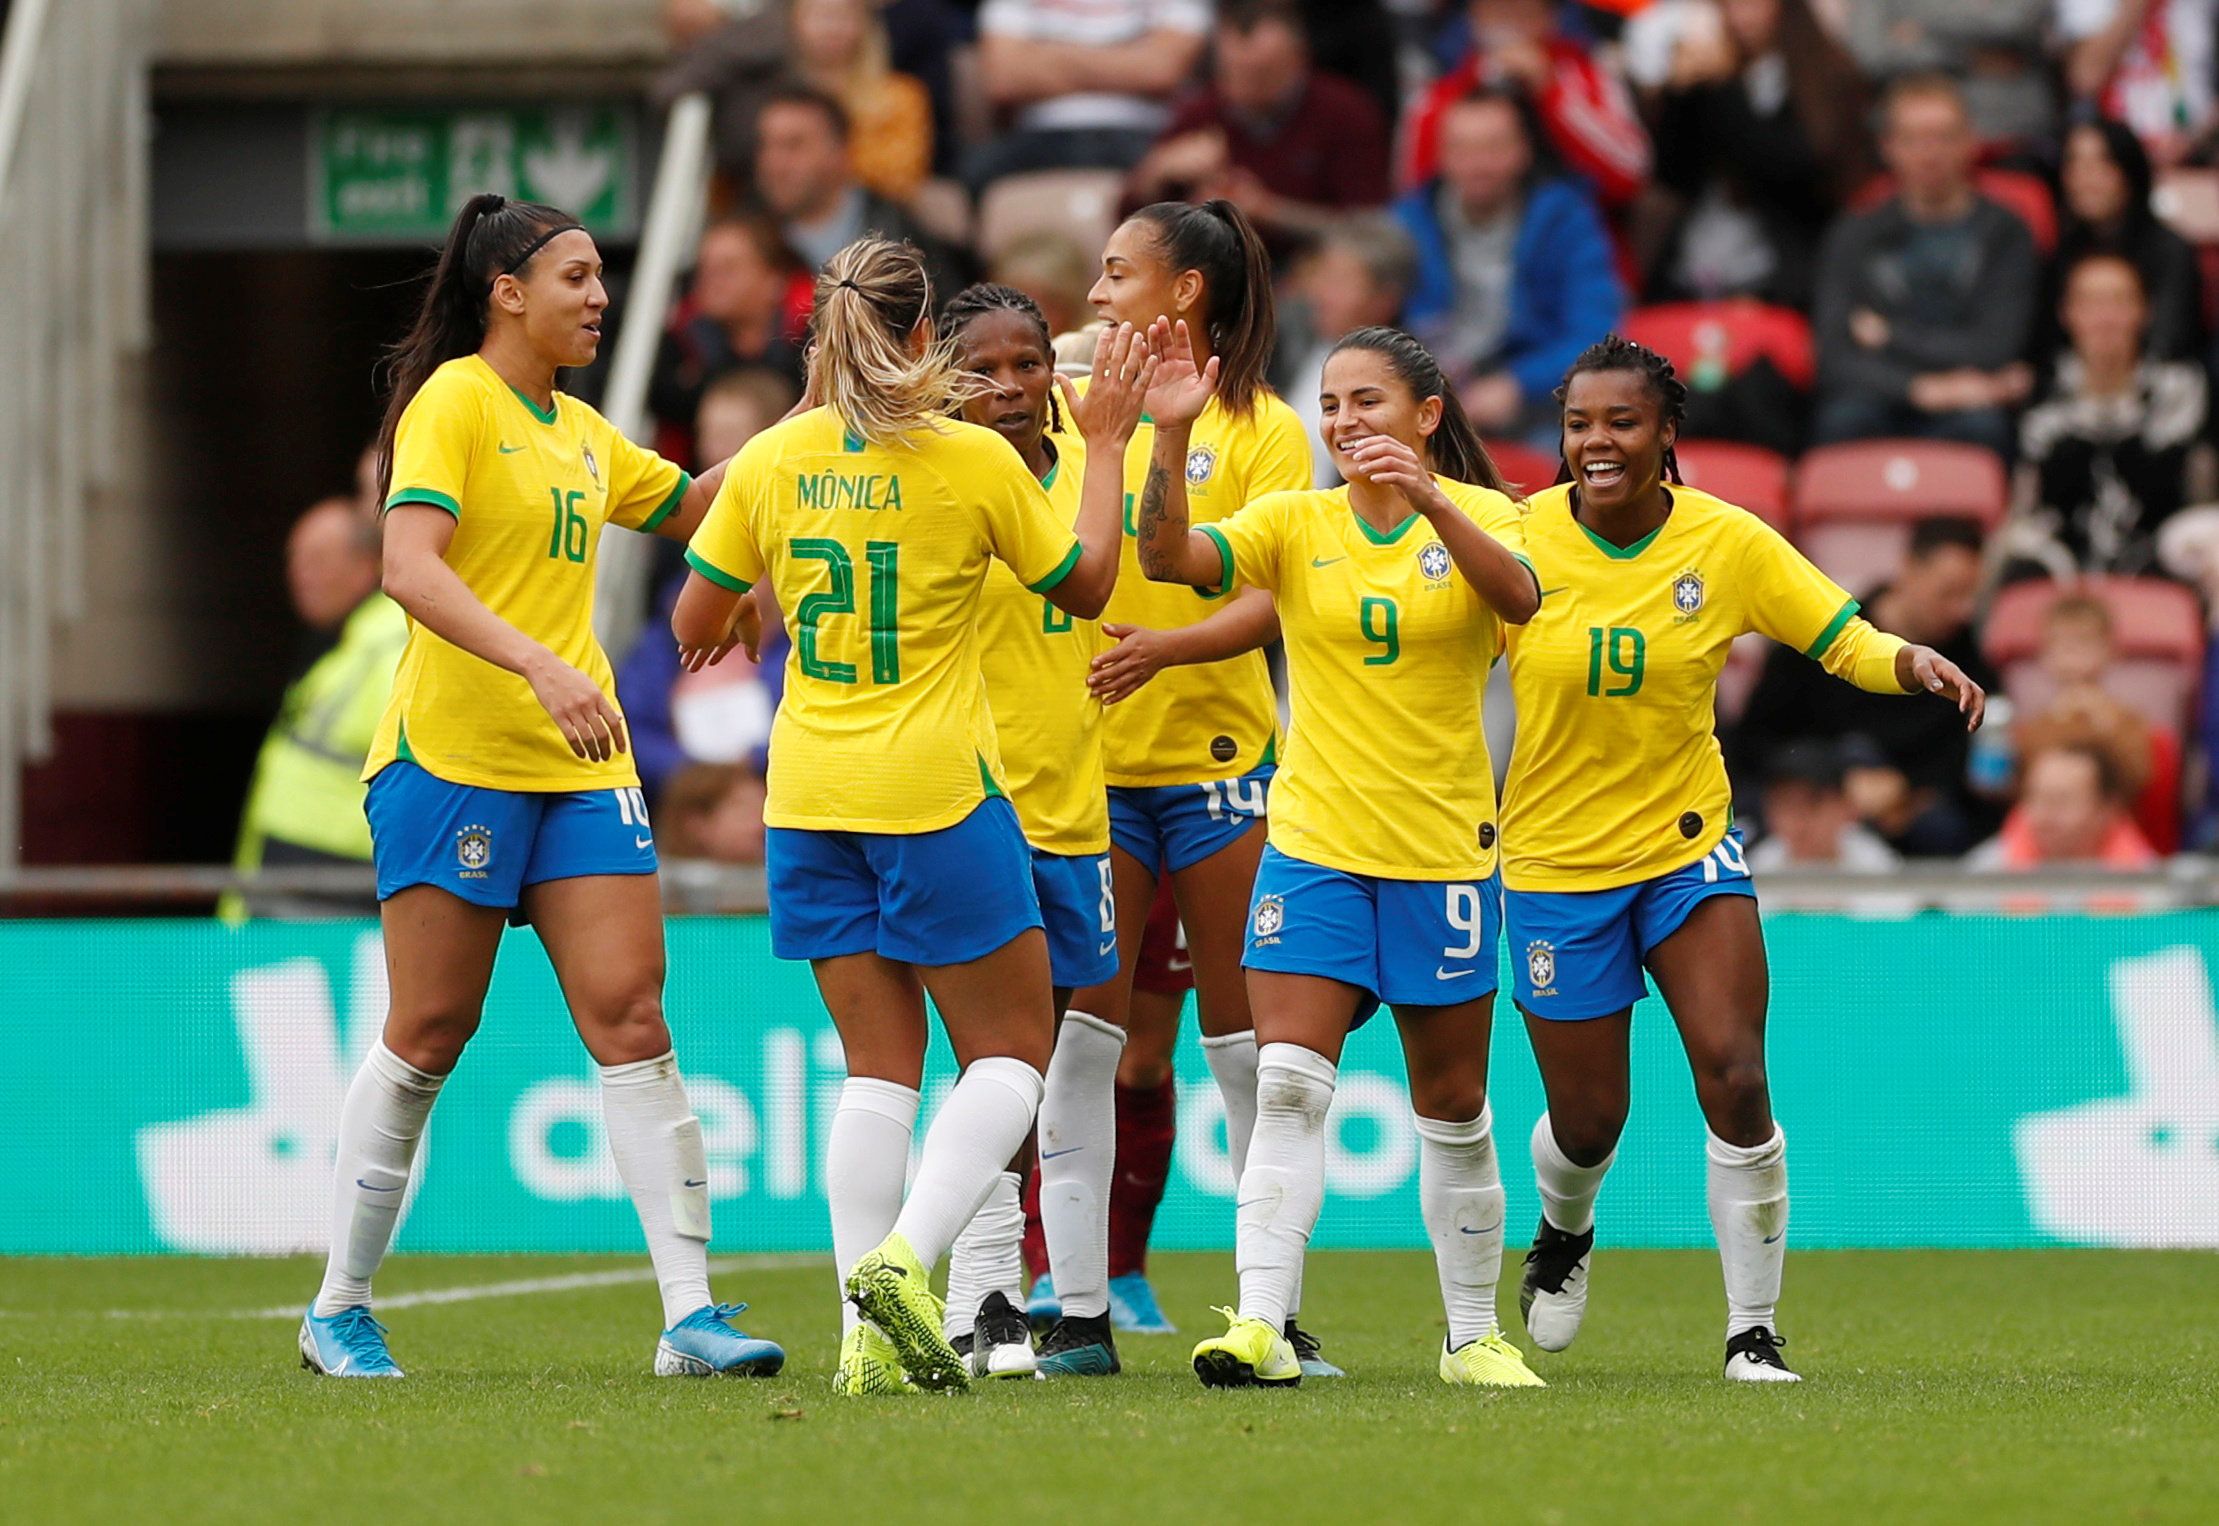 Brazil announces equal pay for women's and men's national football